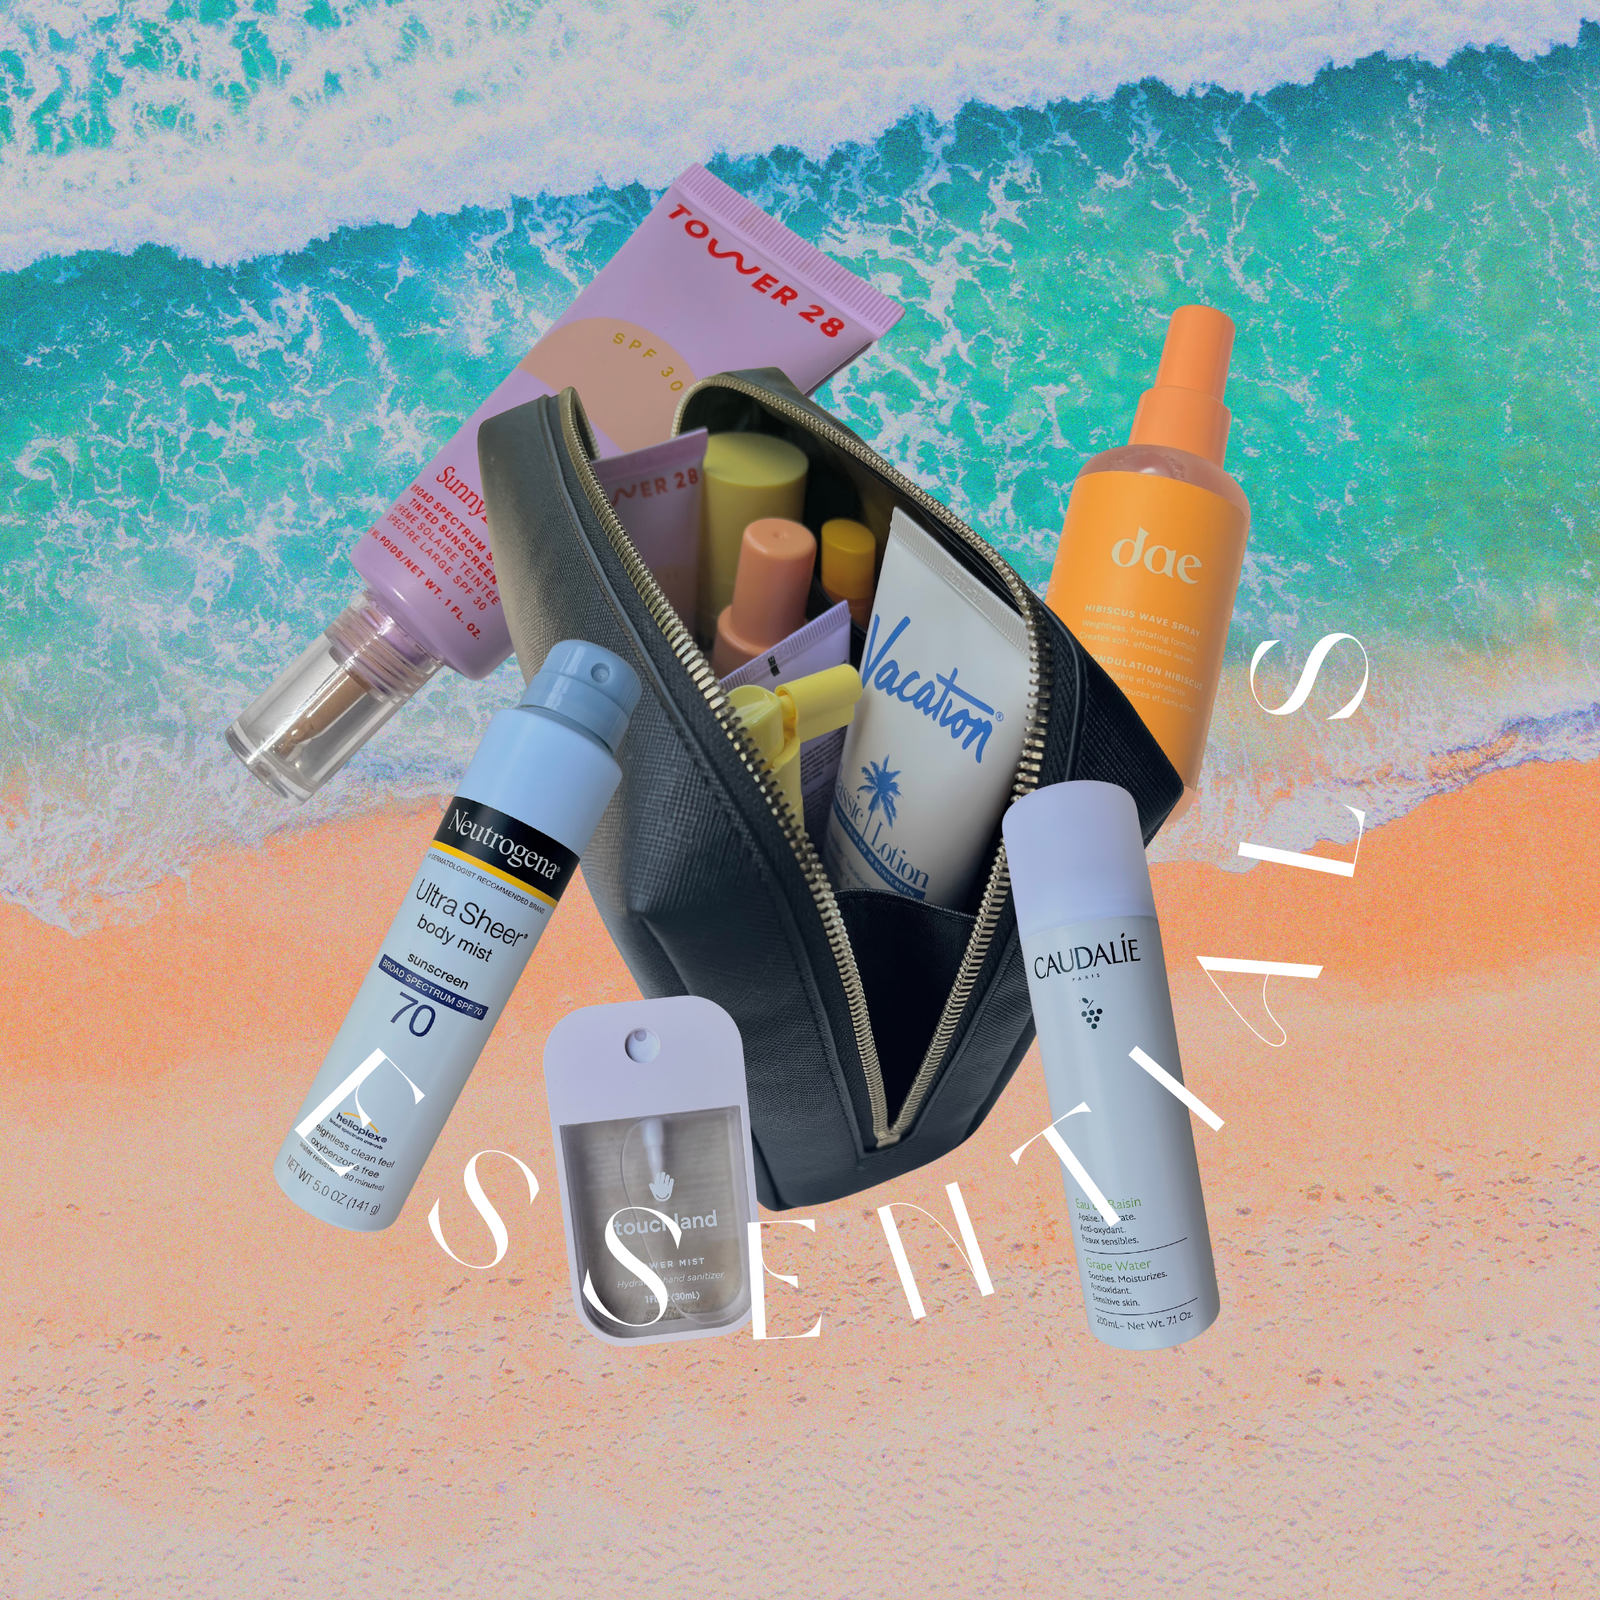 Everything you need in your beach bag